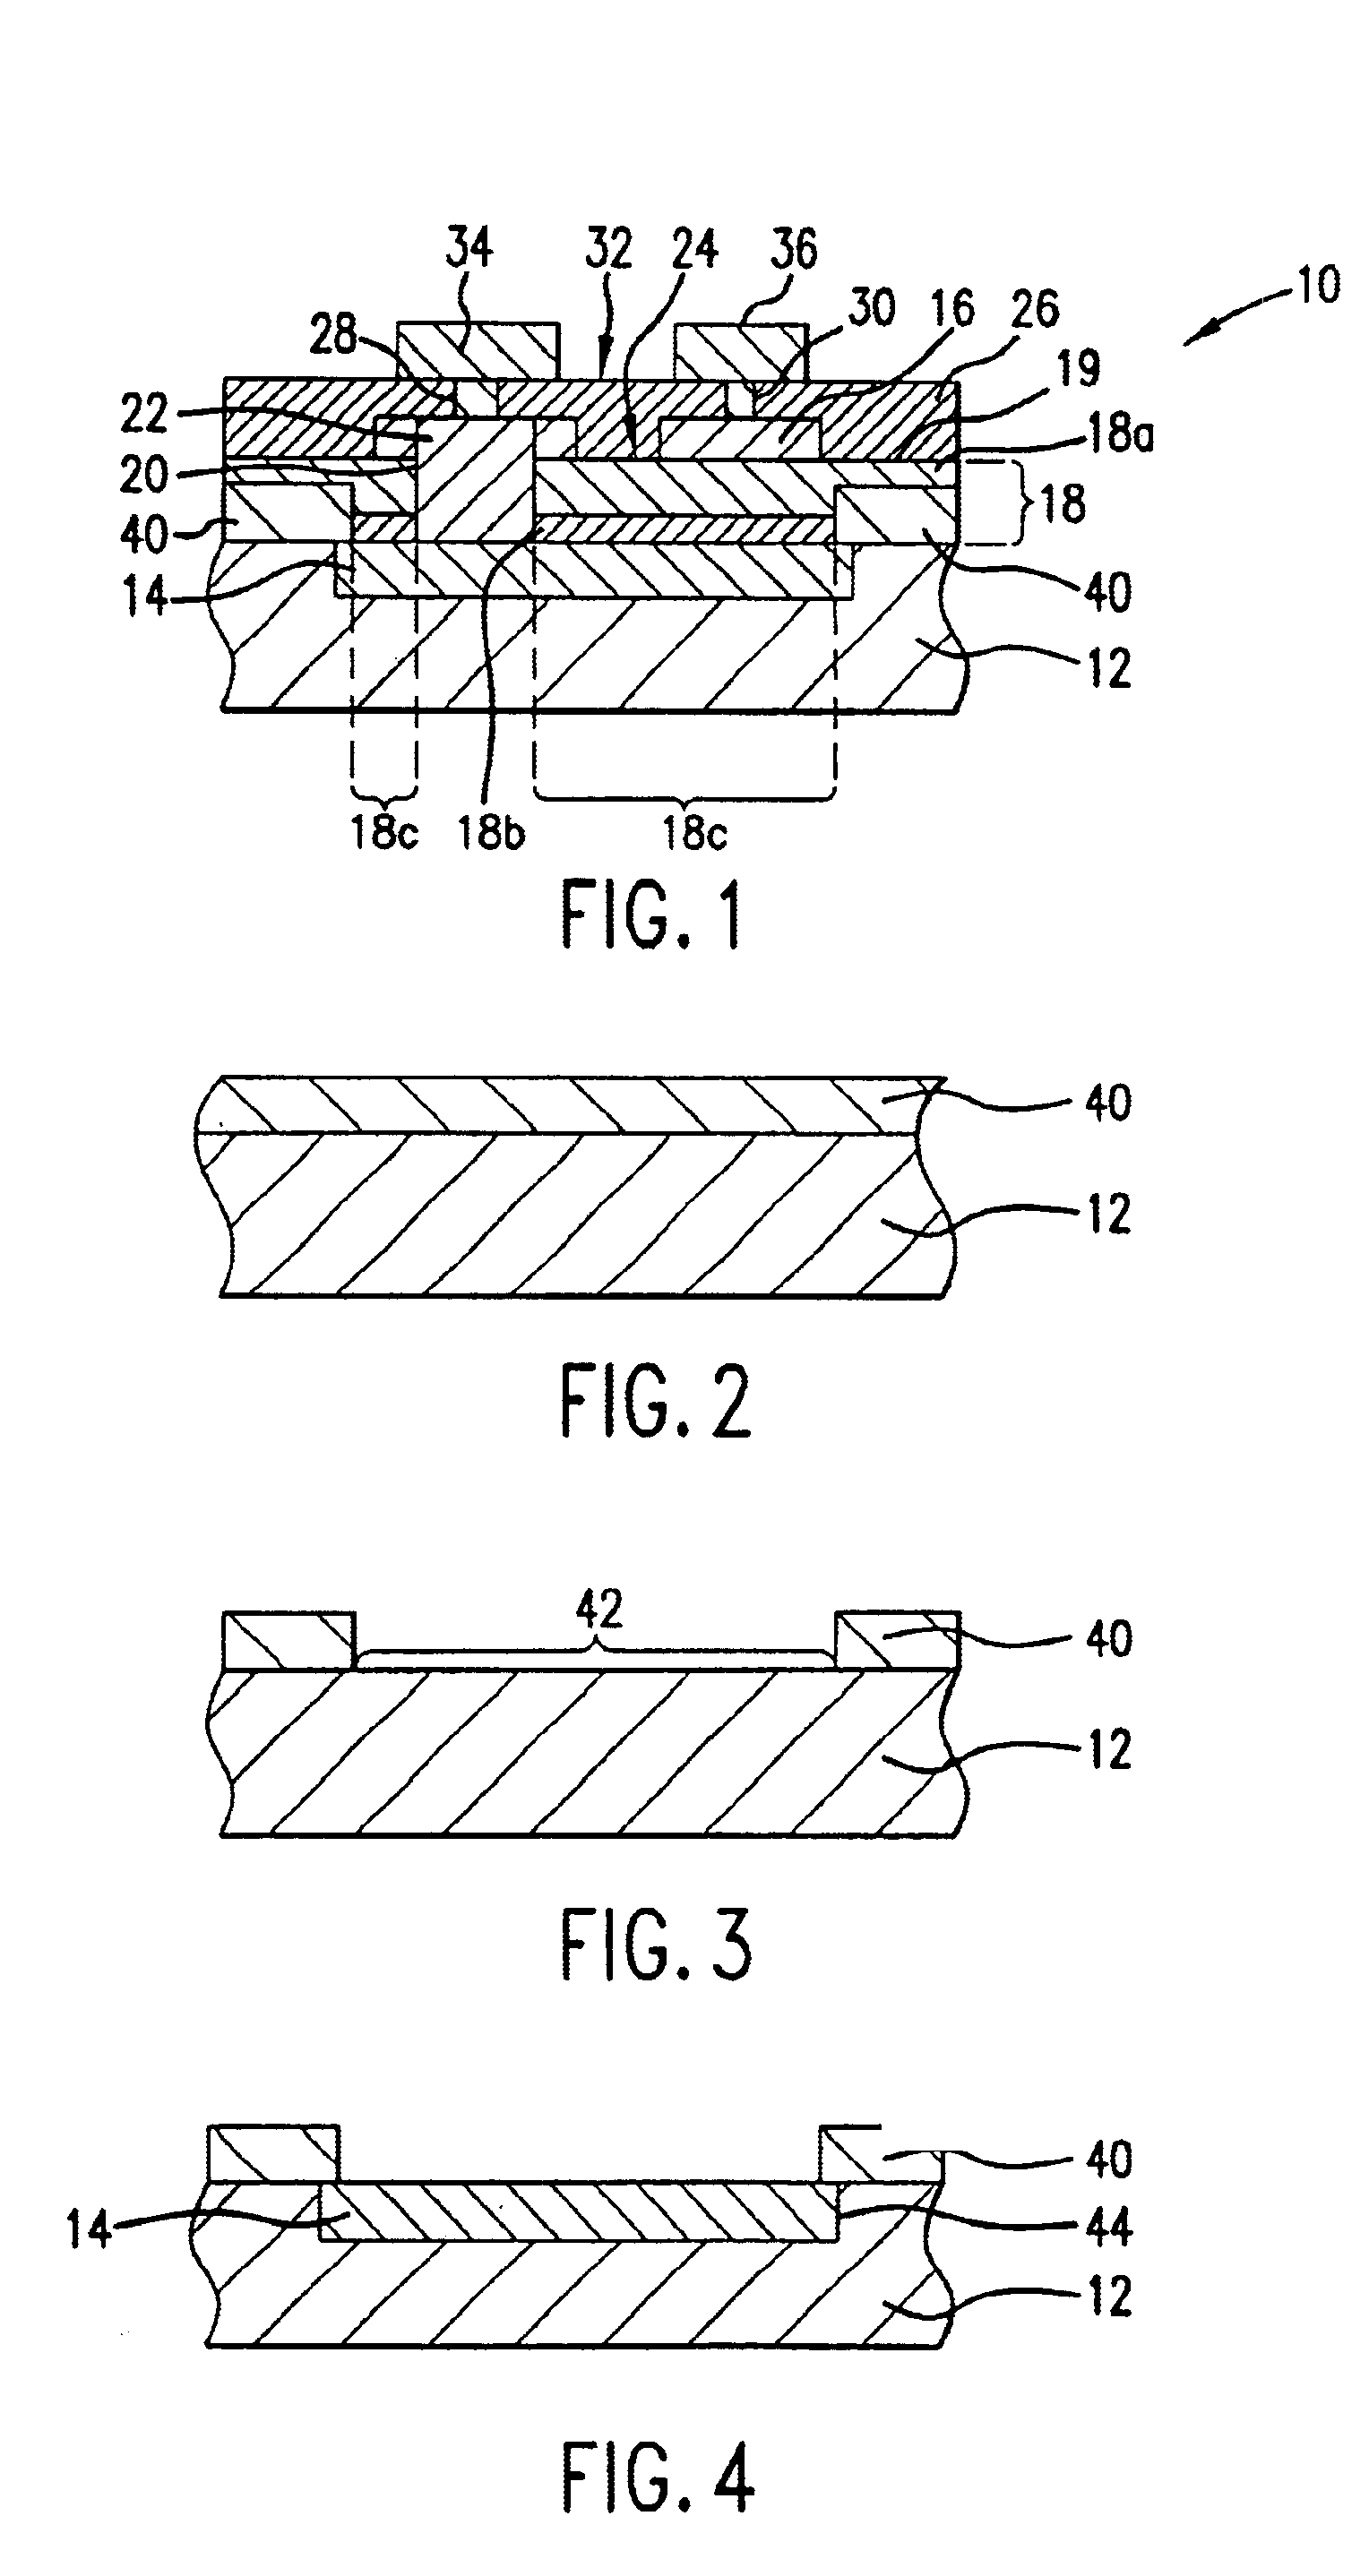 Thin film capacitor having multi-layer dielectric film including silicon dioxide and tantalum pentoxide